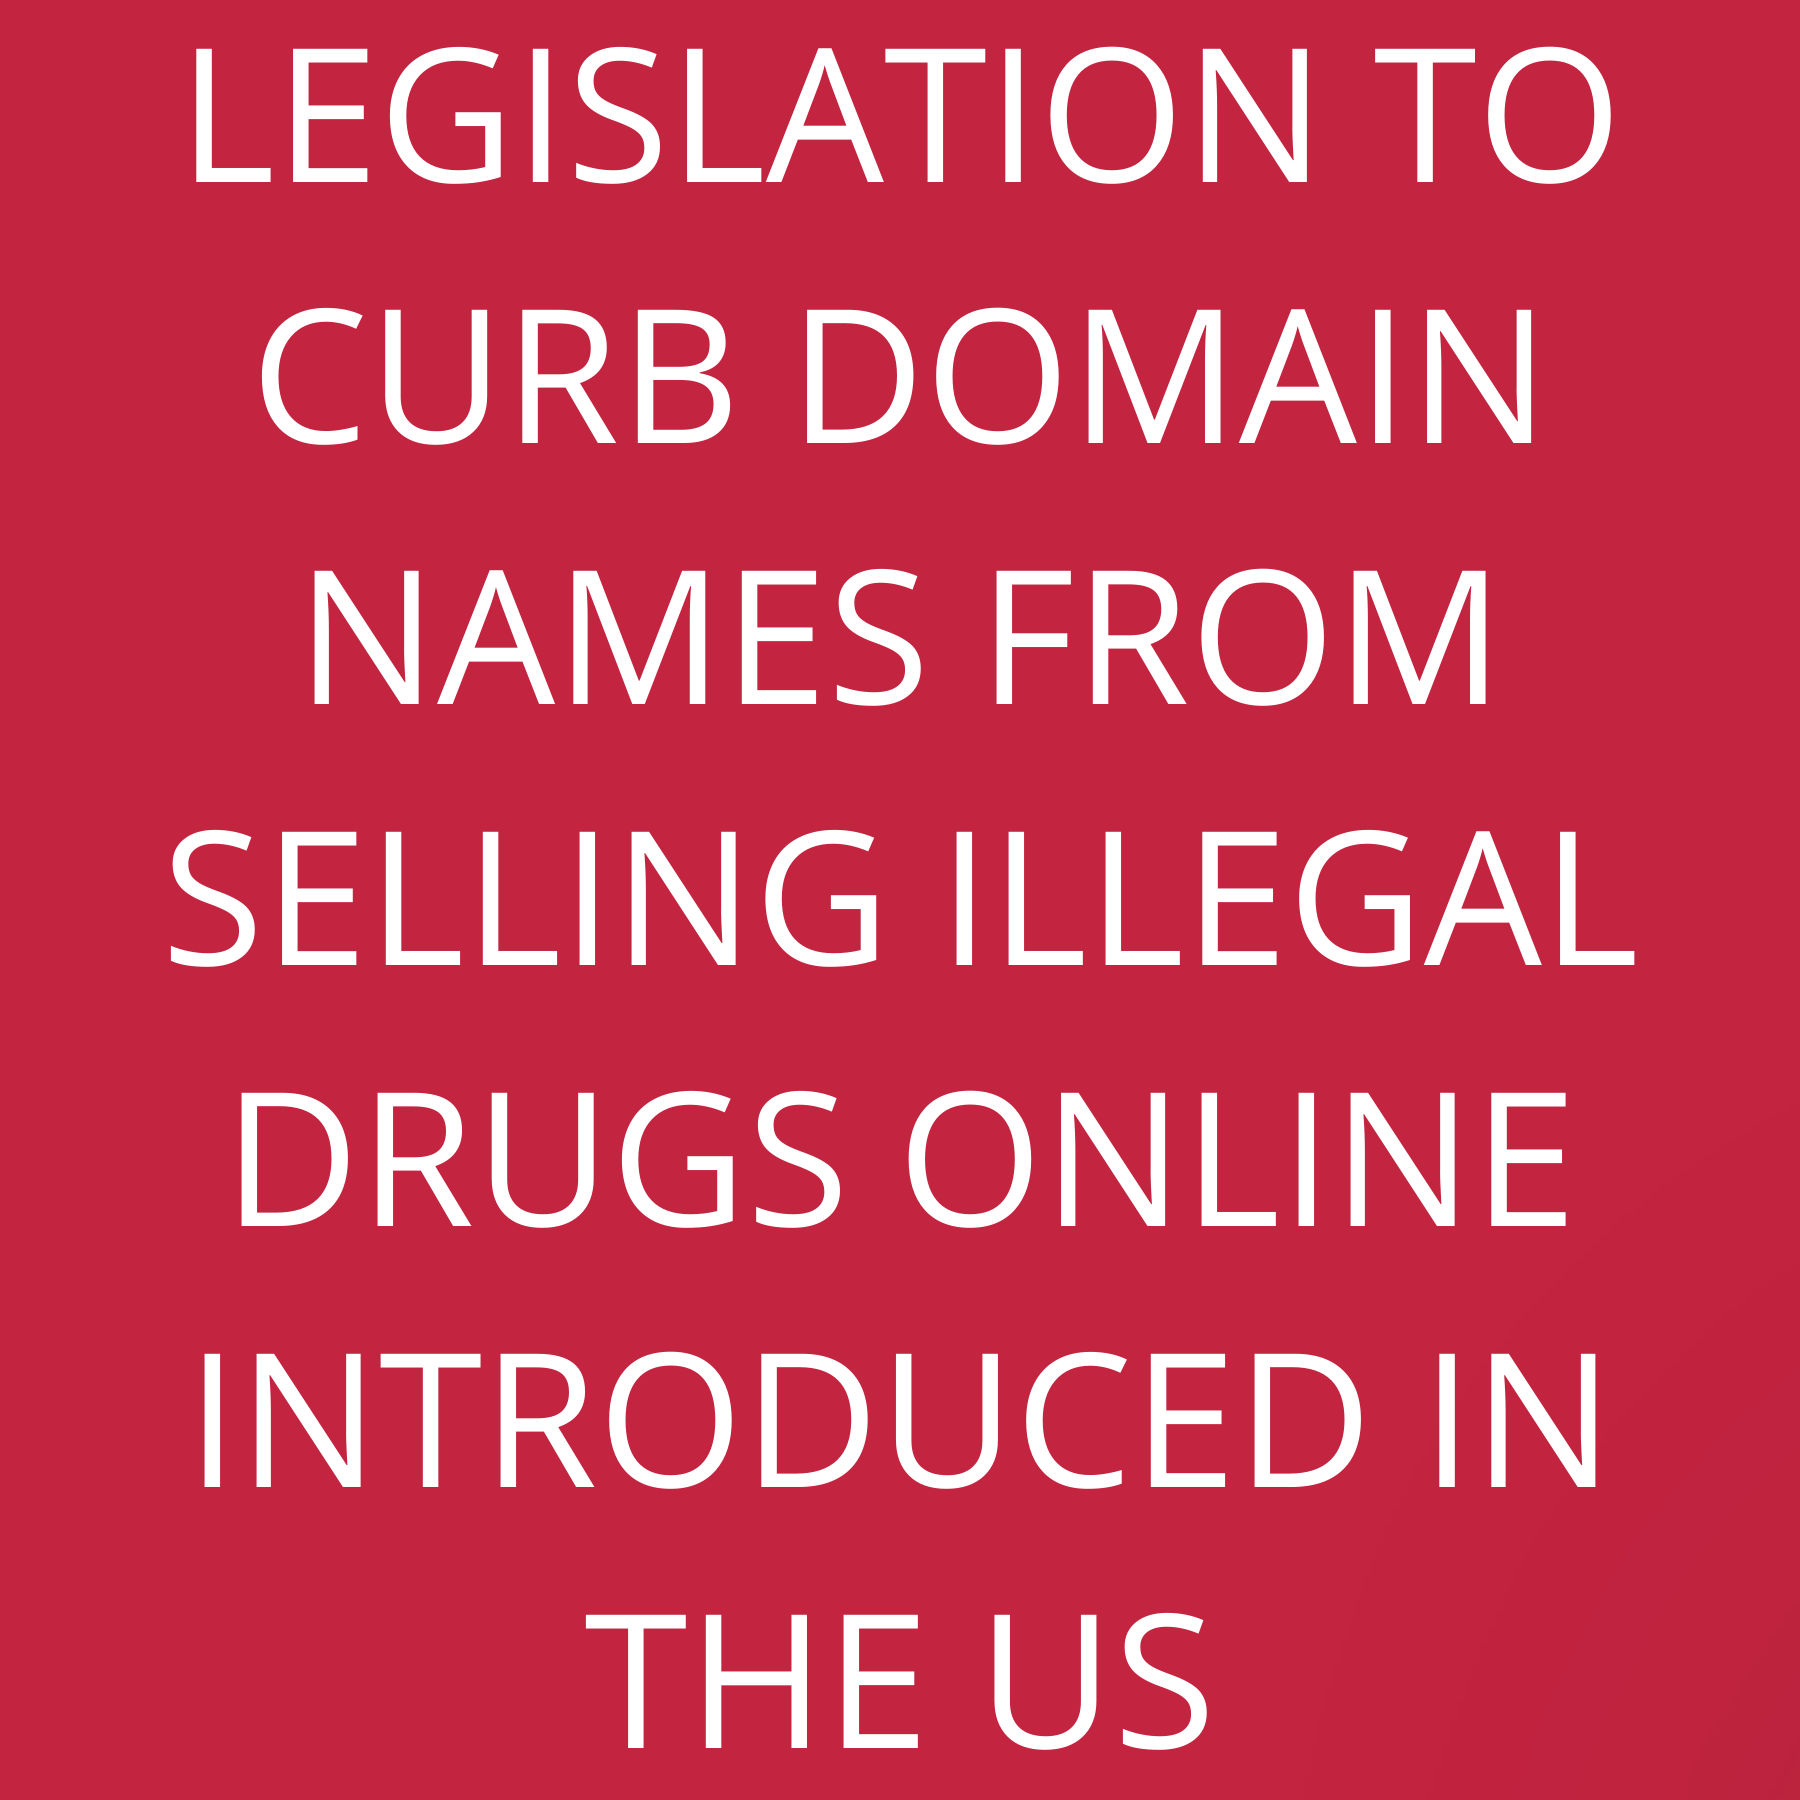 Legislation to curb Domain Names from selling illegal drugs online introduced in the US